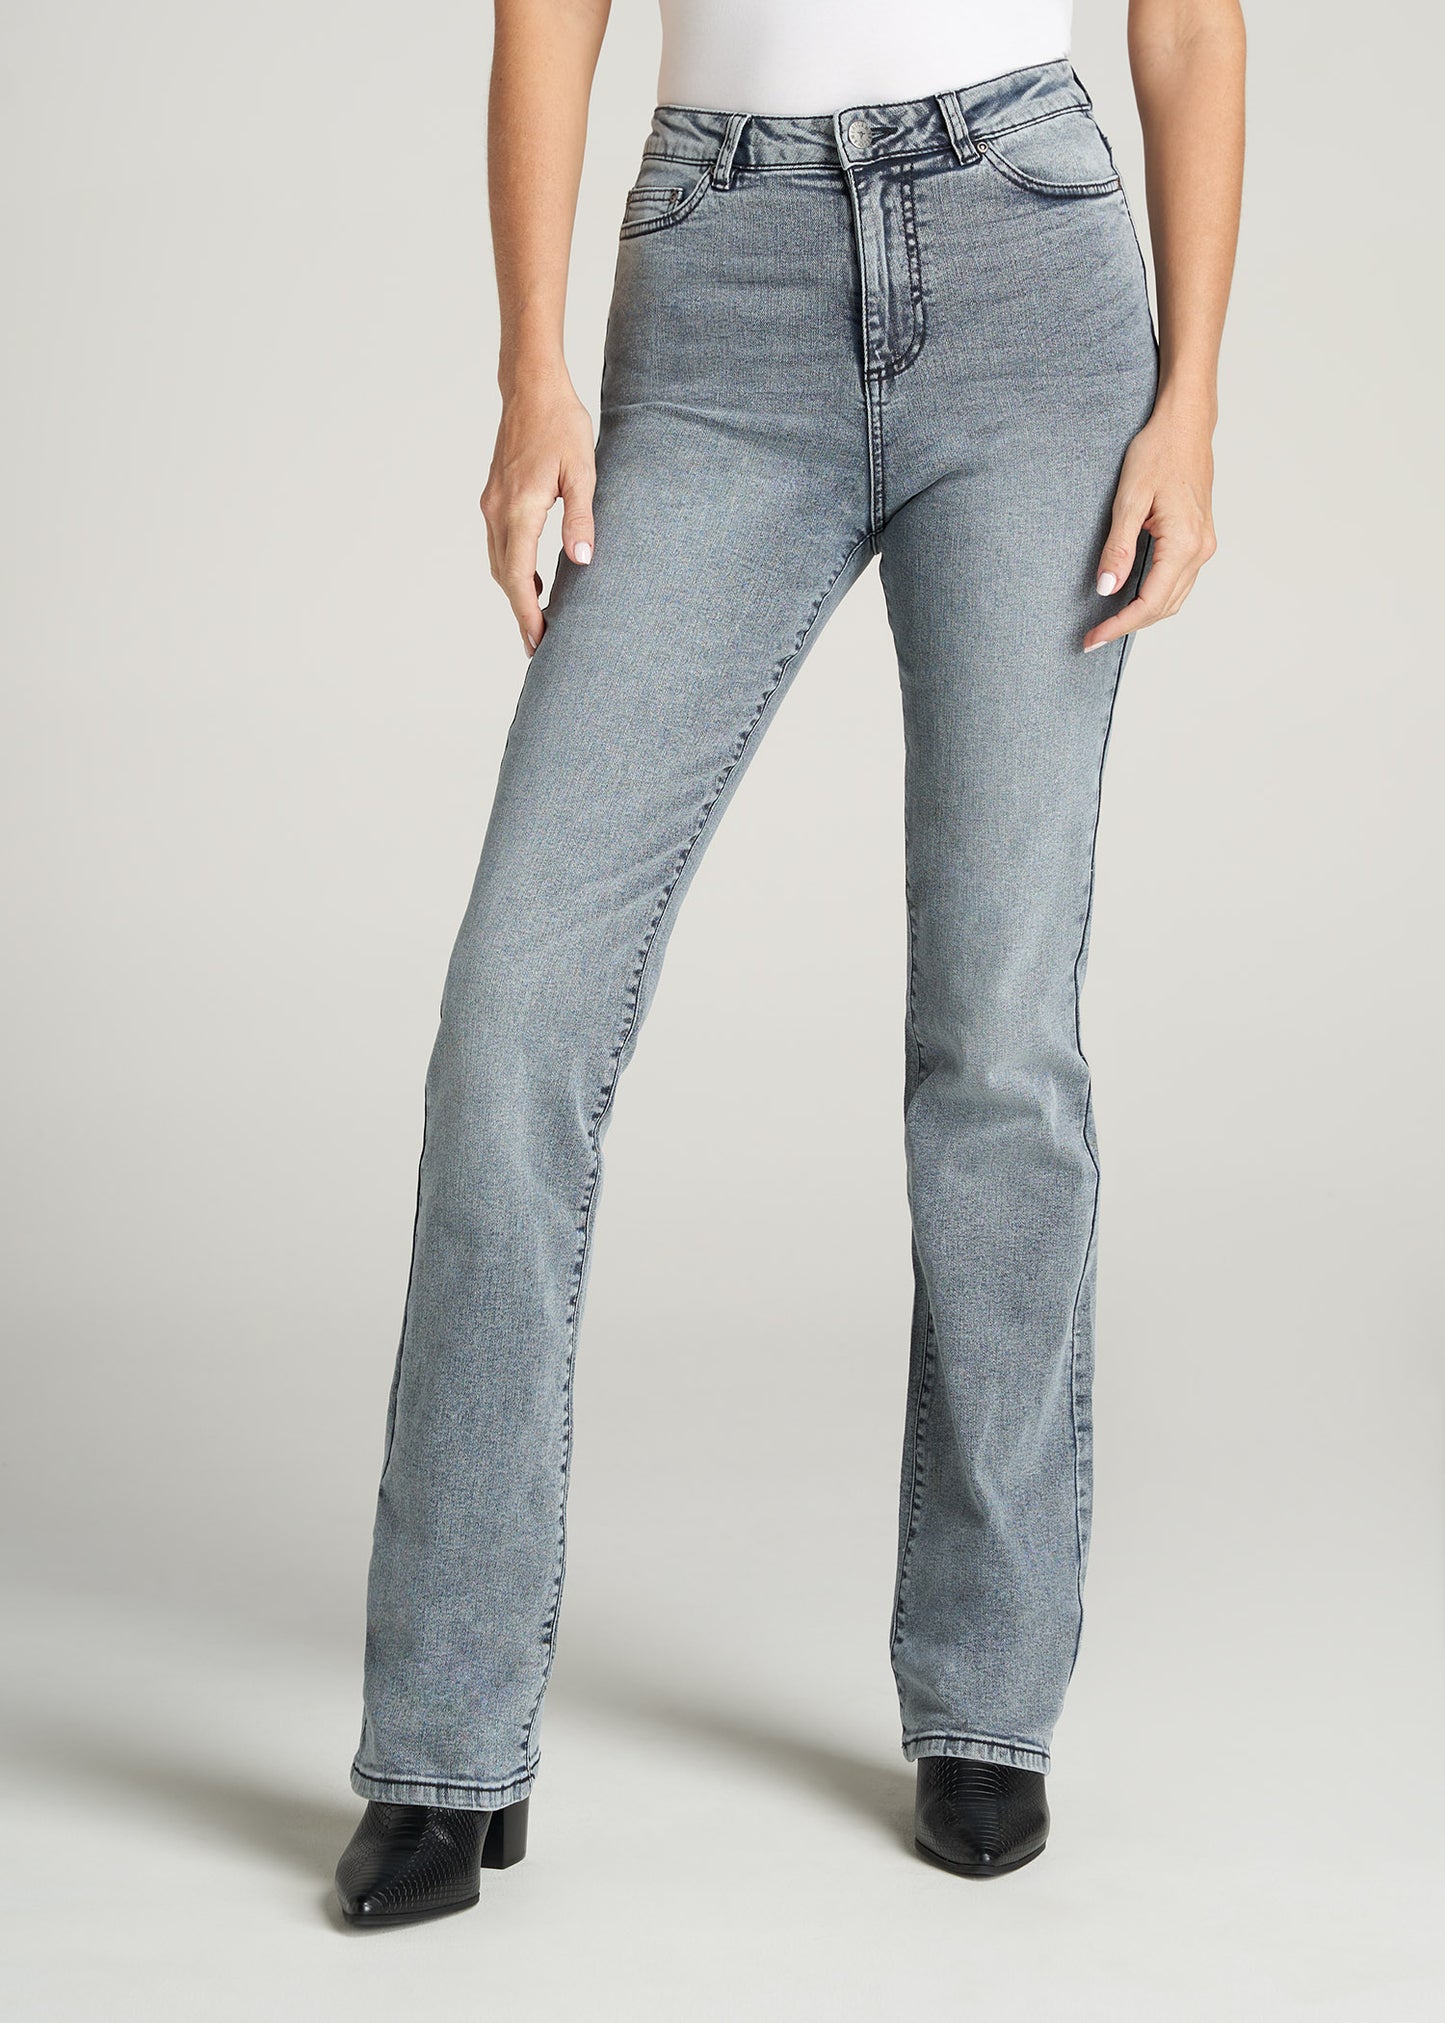 Women's Tall Bootcut Jeans, Flare Jeans